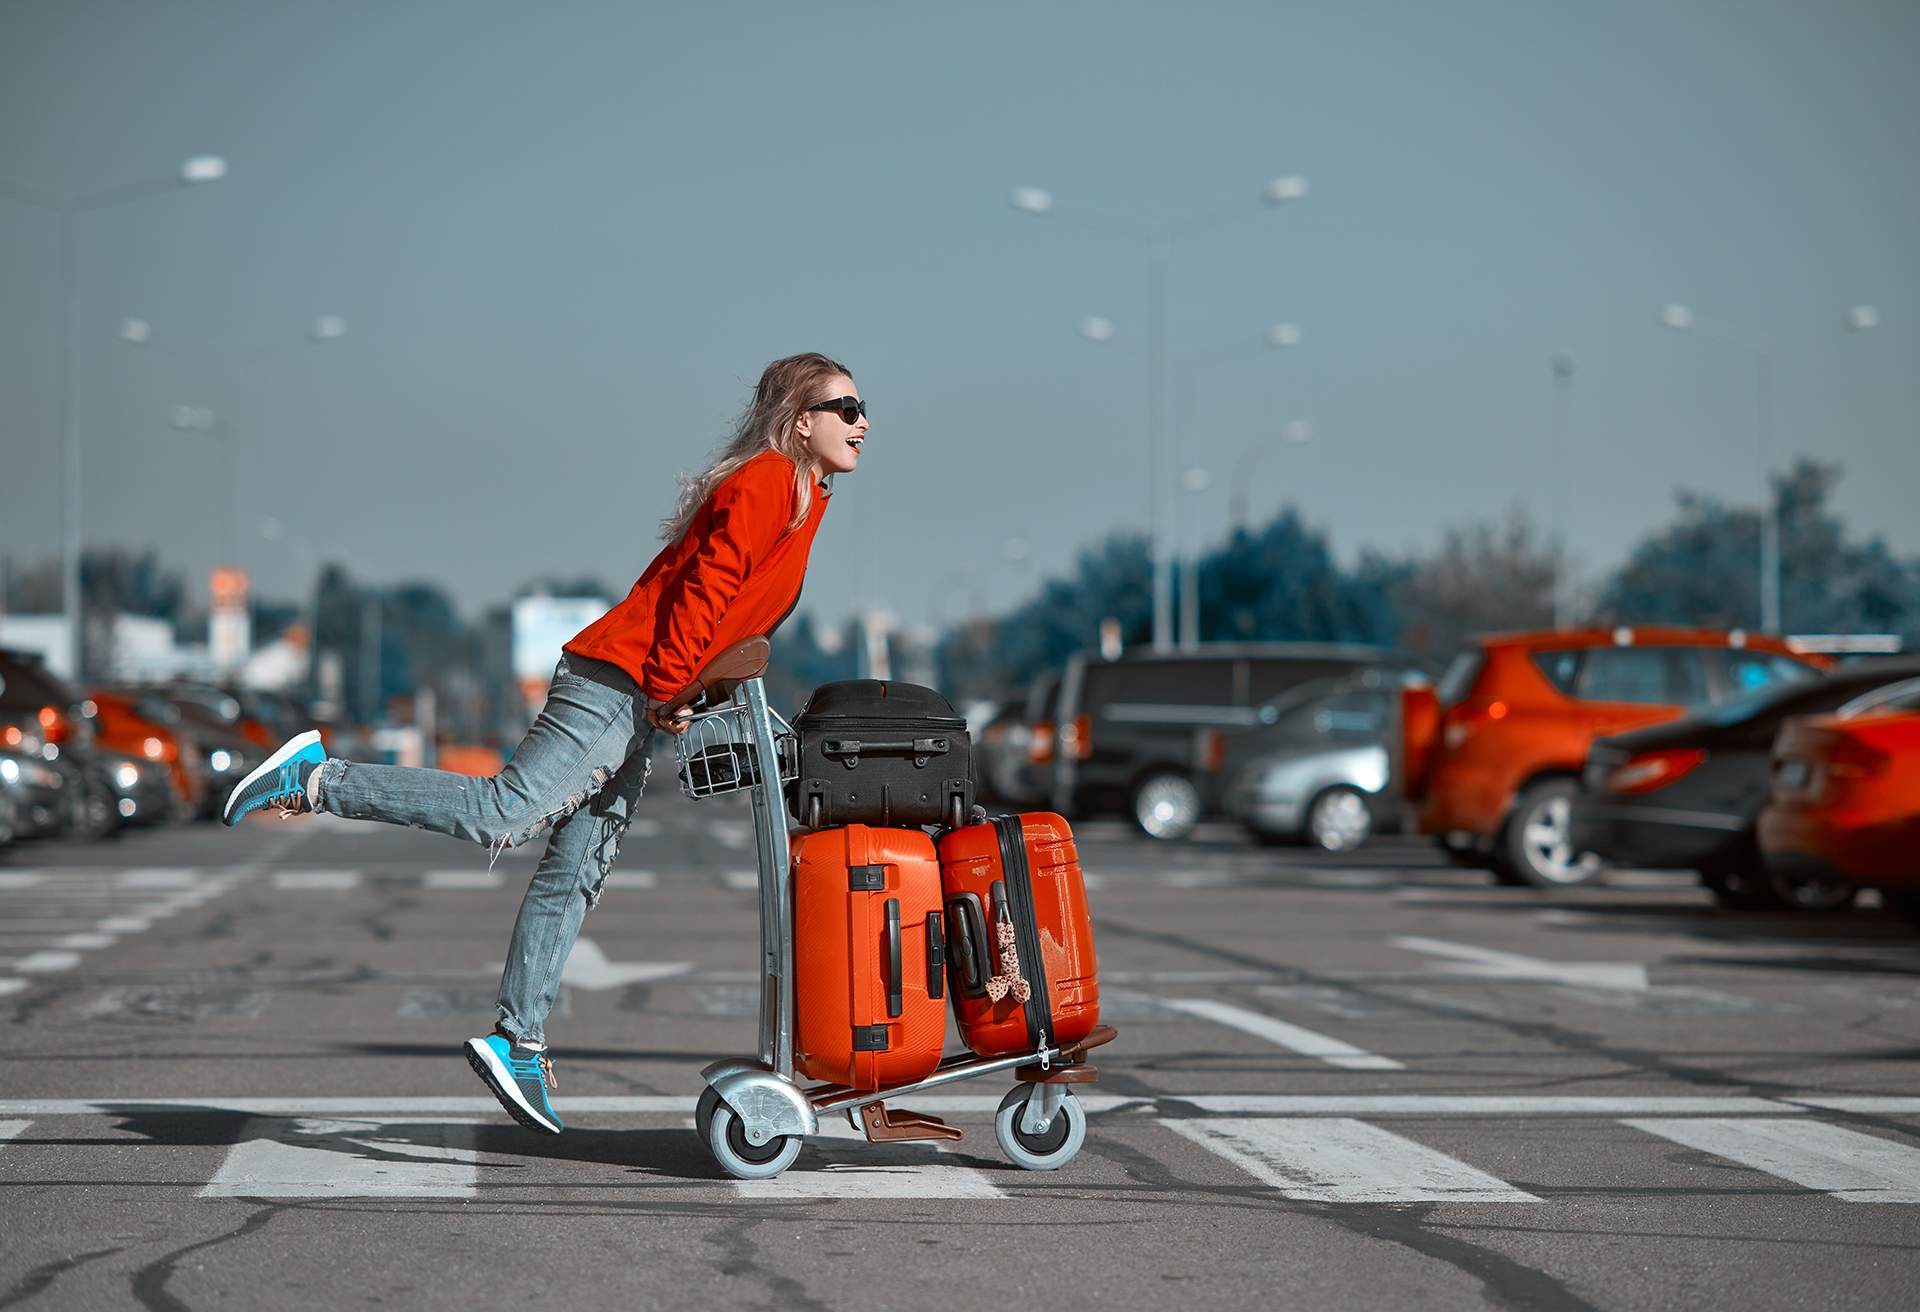 https://www.kayak.com/news/wp-content/uploads/sites/19/2023/07/theme_person_travel_luggage_parking-lot_airport-gettyimages-641552182_universal_within-usage-period_62923.jpg